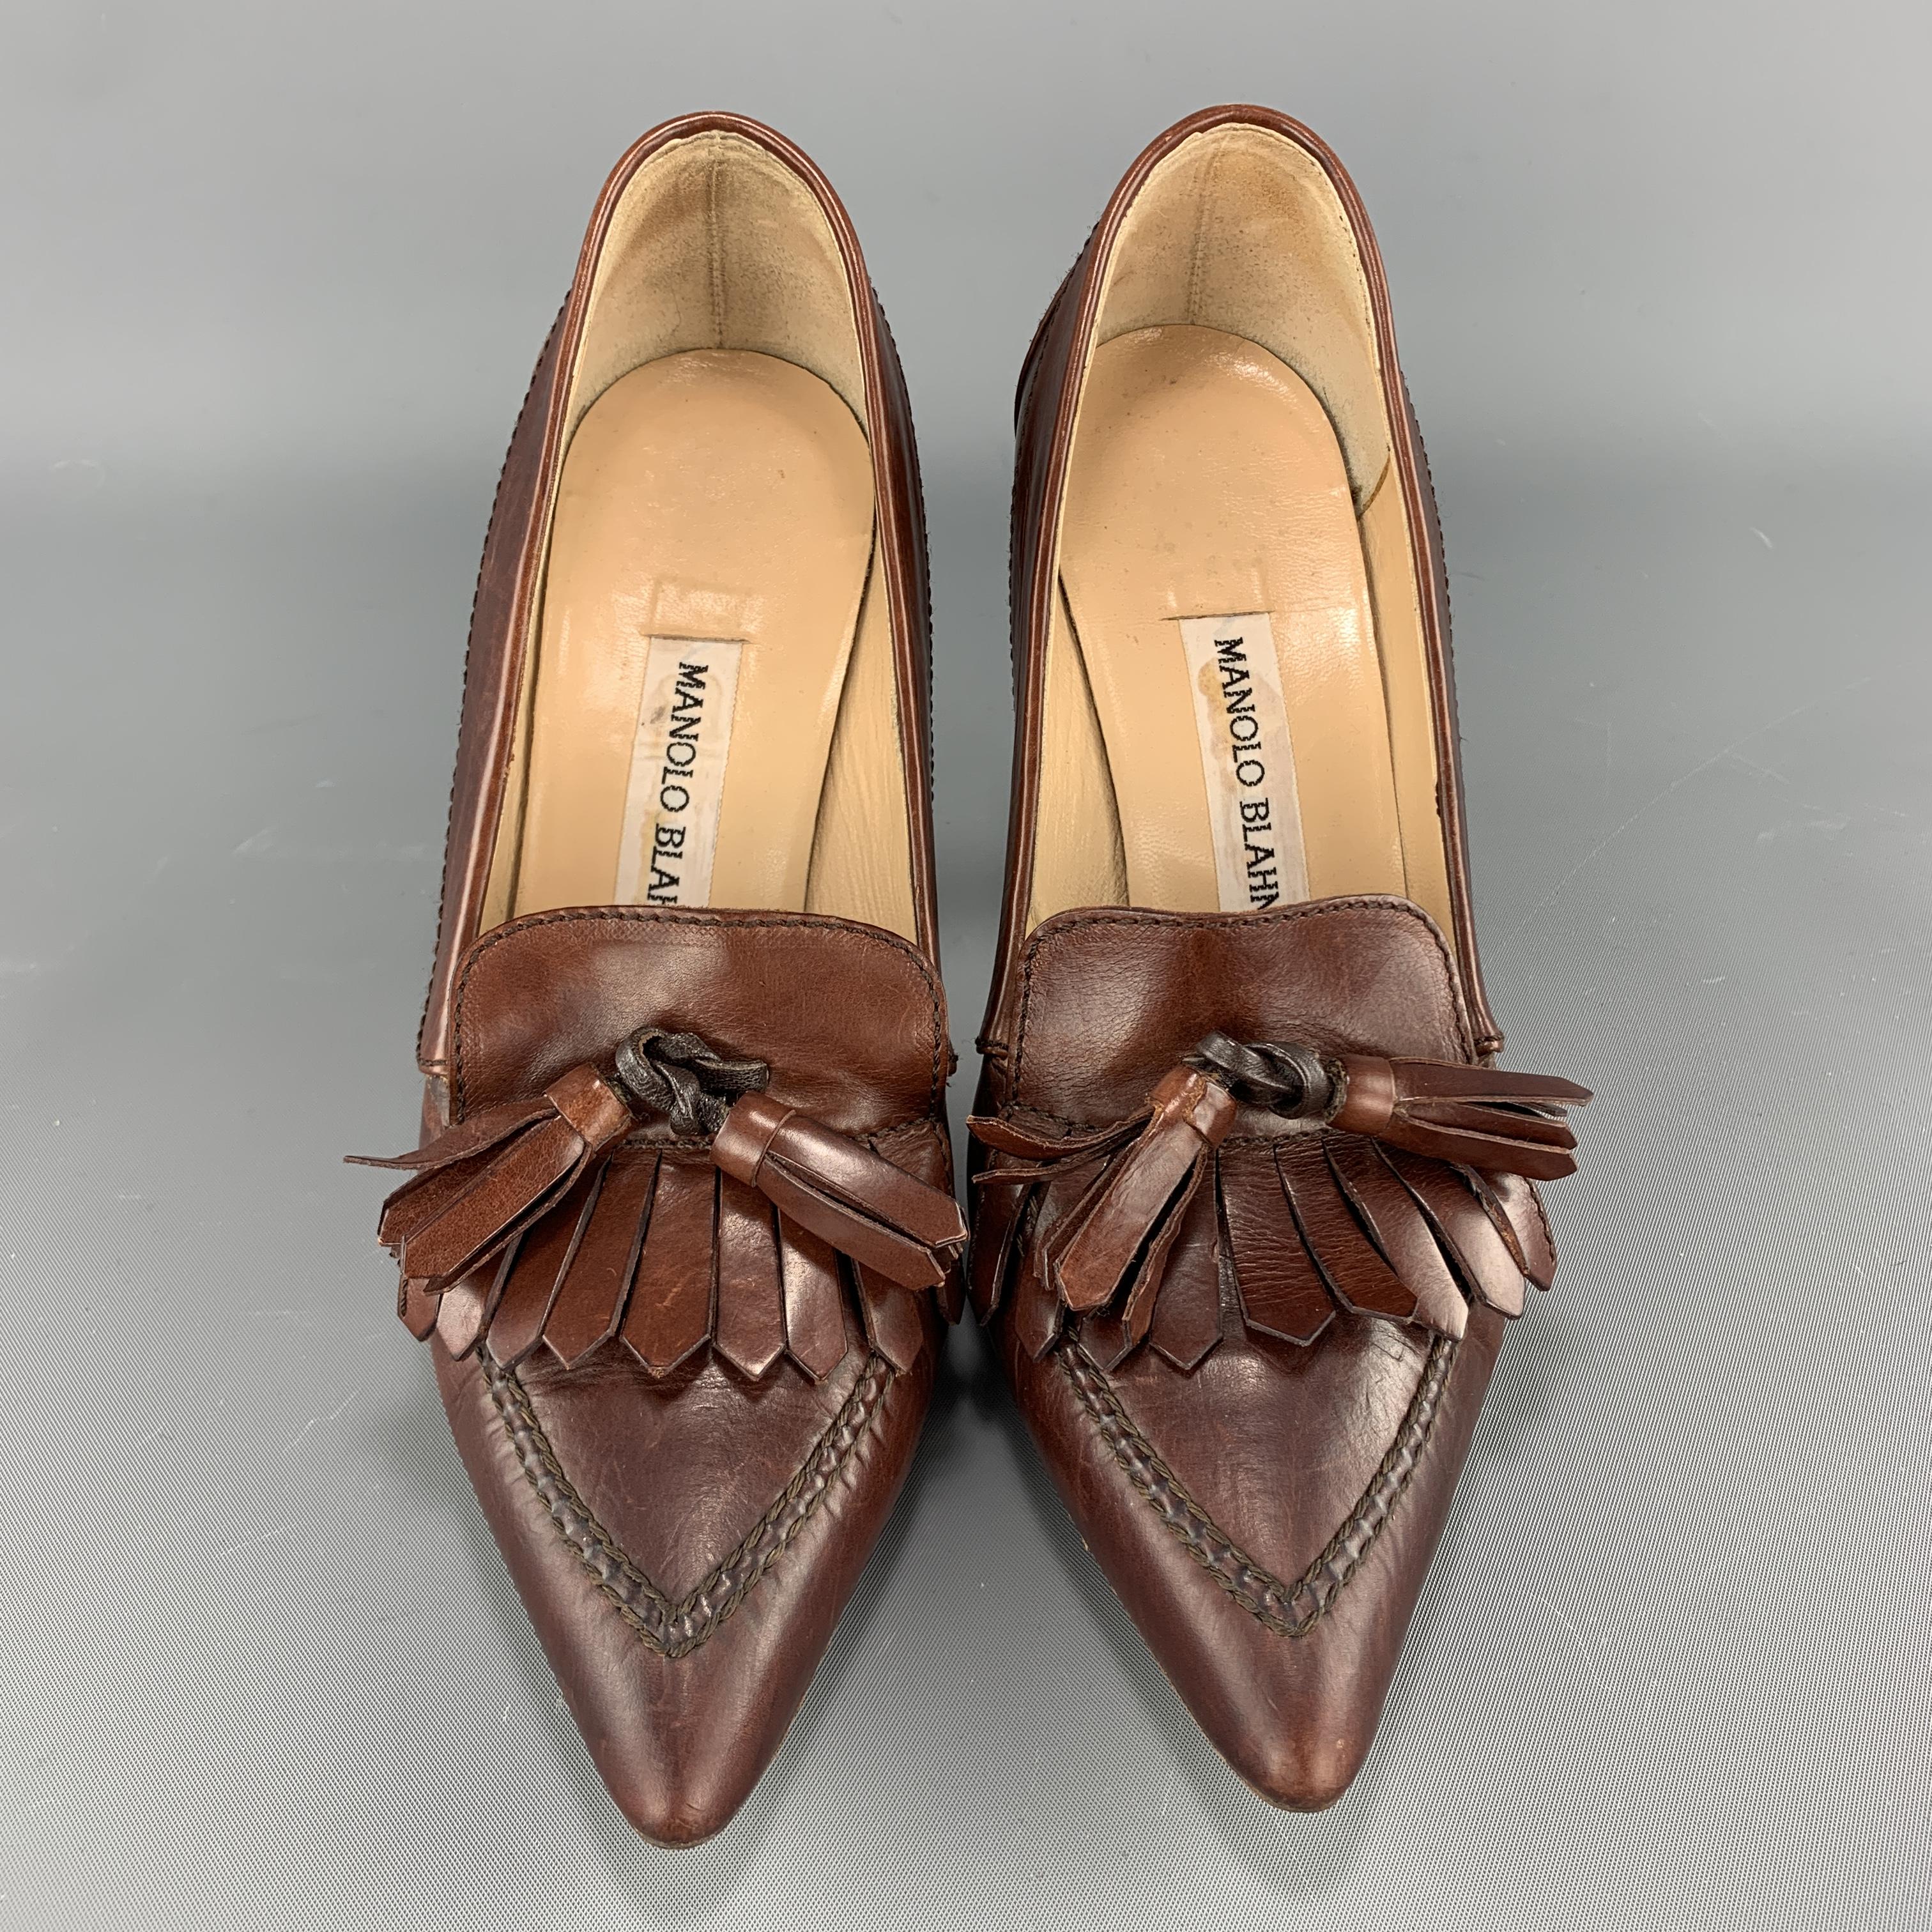 MANOLO BLAHNIK pumps come in tan brown leather with a pointed apron toe, detailed with eyelash fringe and tassels. Made in Italy.

Very Good Pre-Owned Condition.
Marked: IT 35.5

Heel: 4 in.